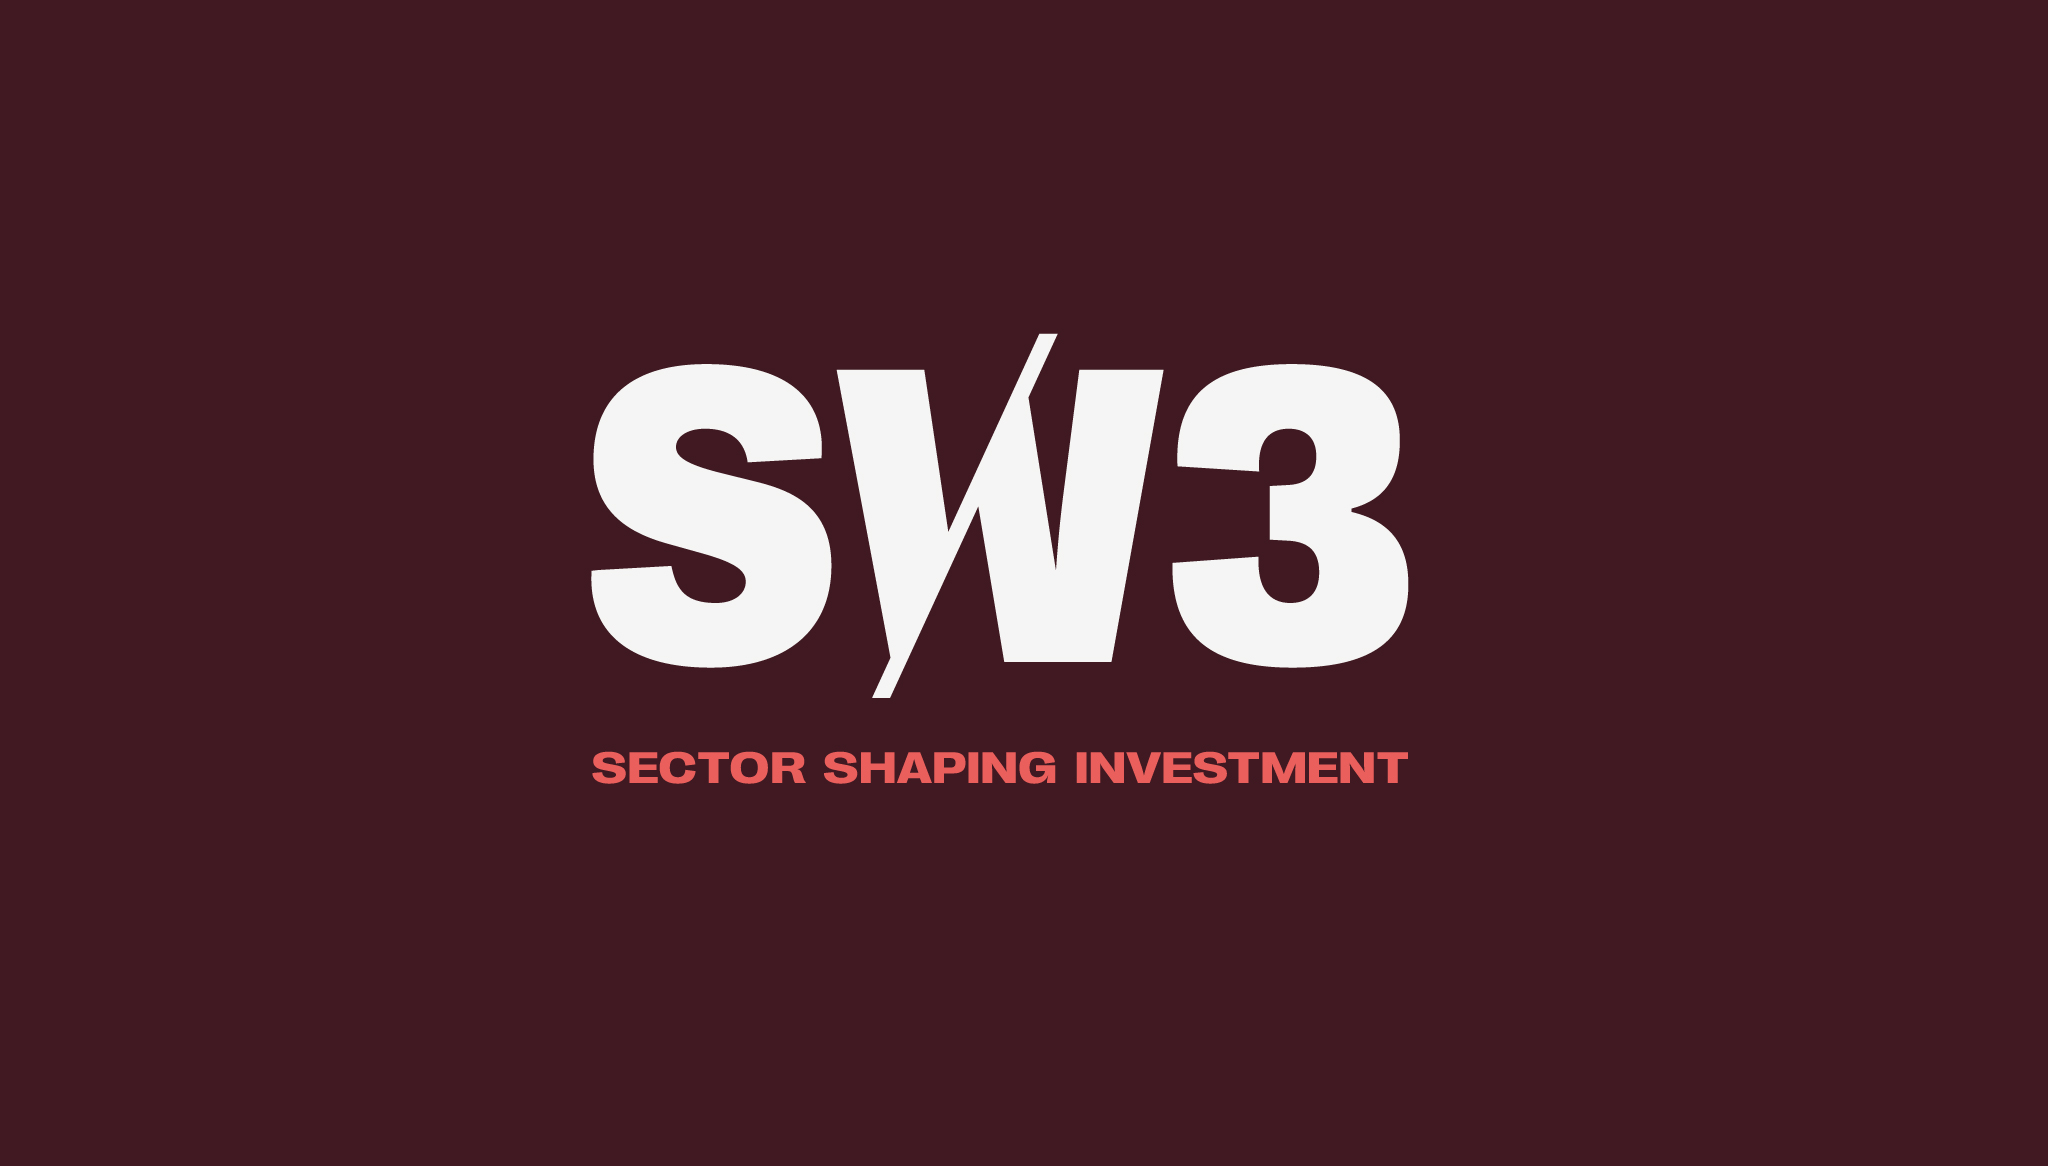 Sector-Shaping Investment for SW3 Capital by Rowdy Studio